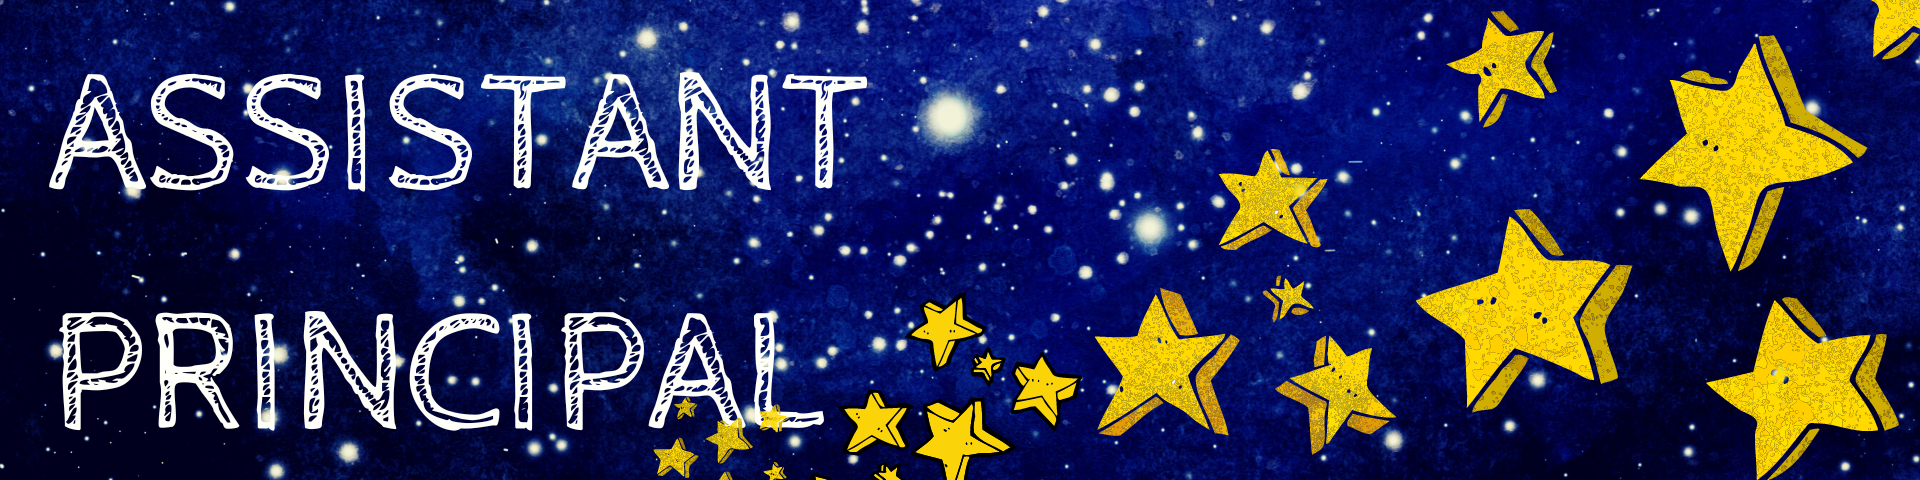 assistant principal banner with stars